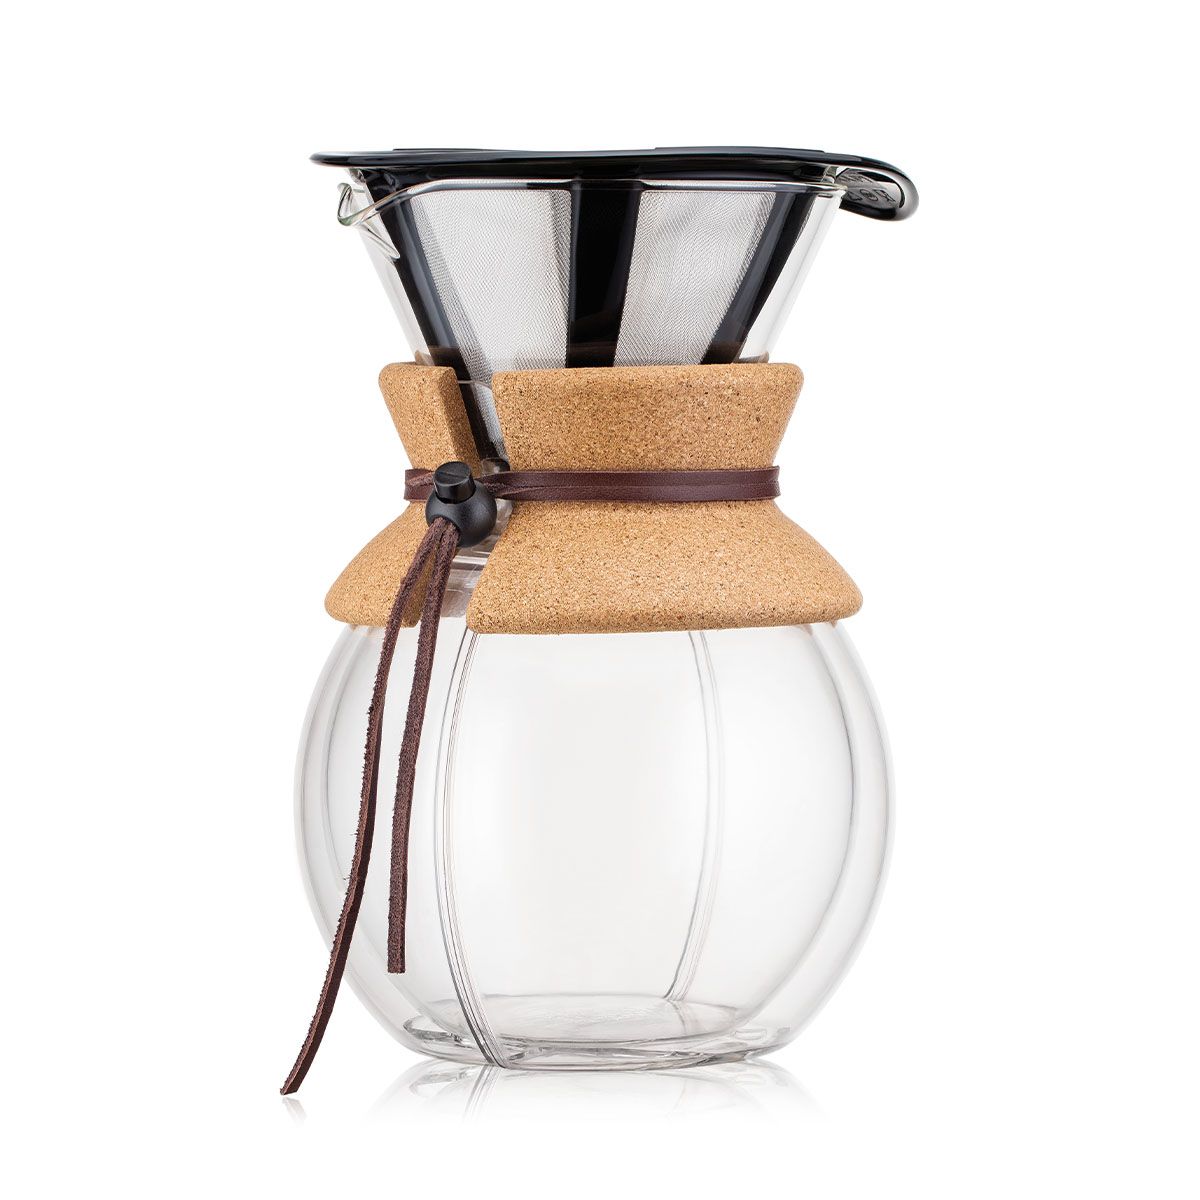 Bodum Pour Over Double wall Coffee Maker 8 cup